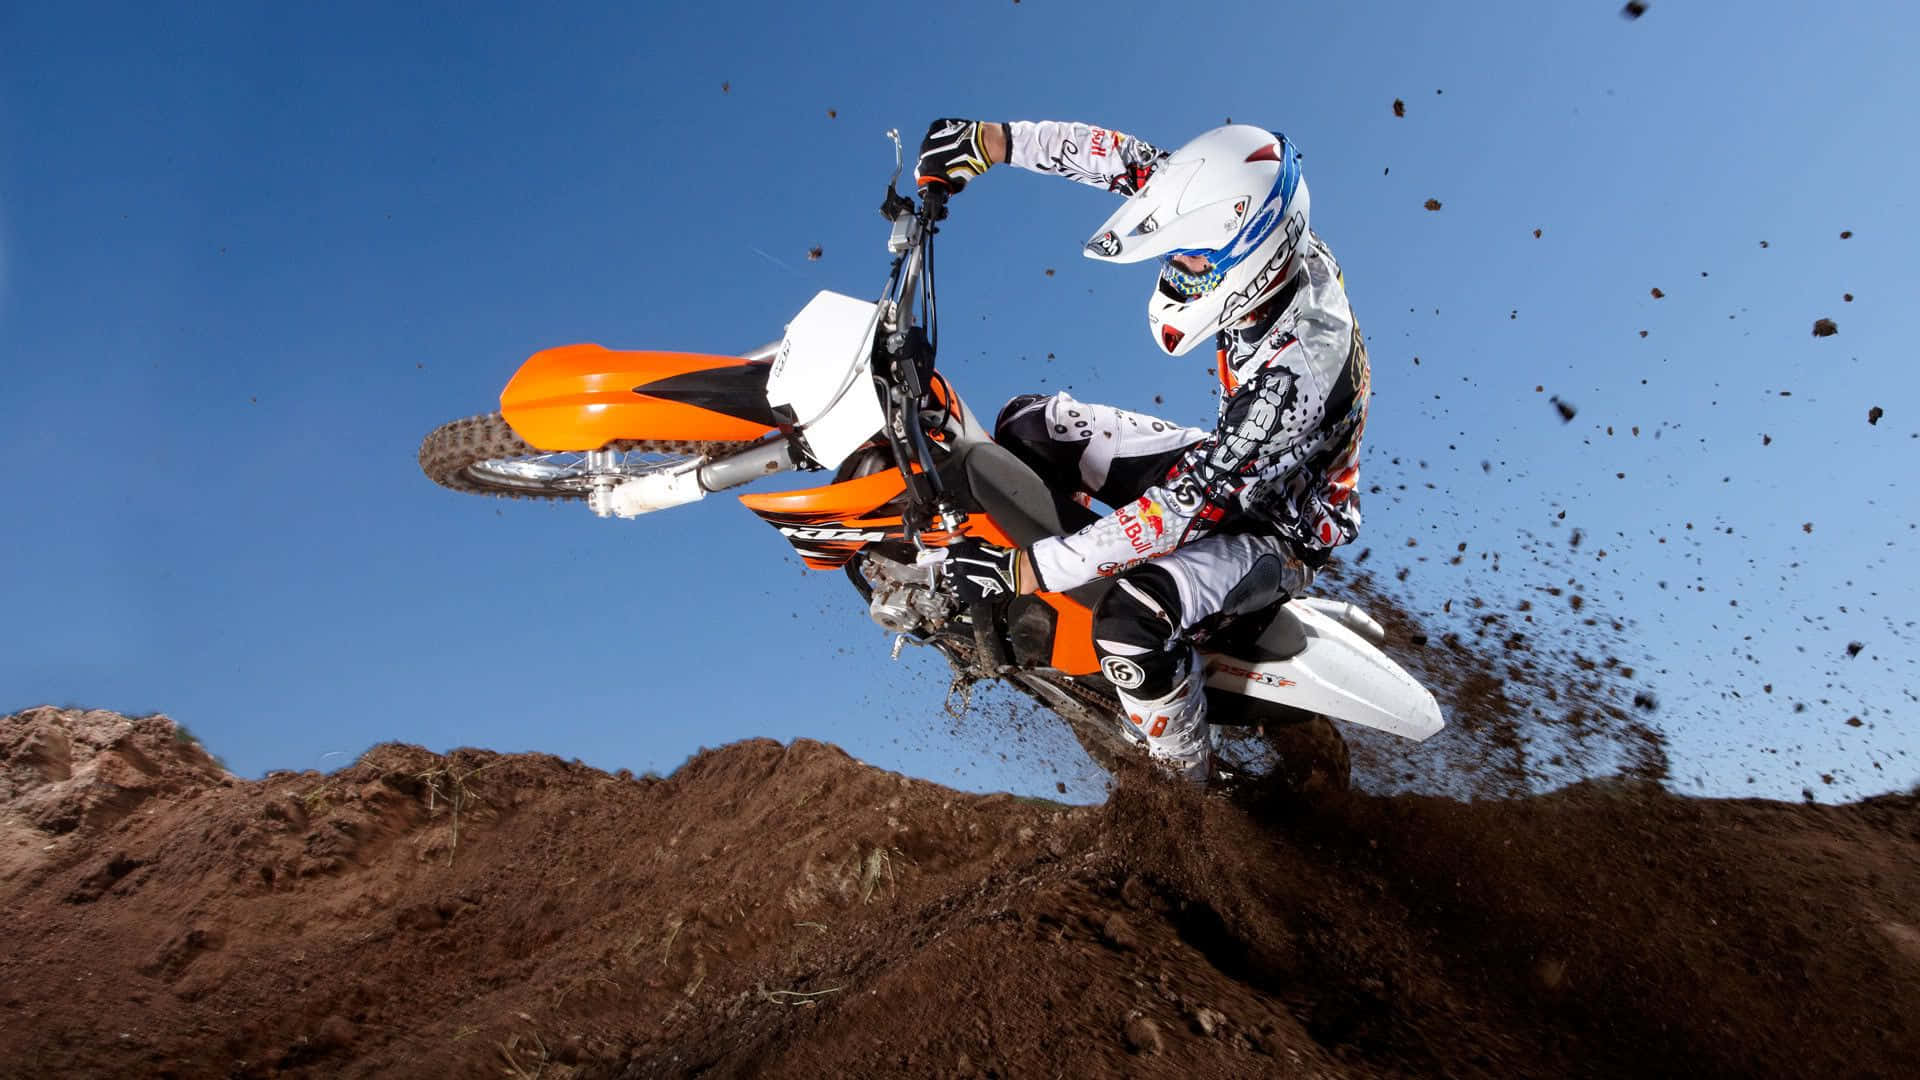 Dirtbike rider tackling a dirt trail at high speed